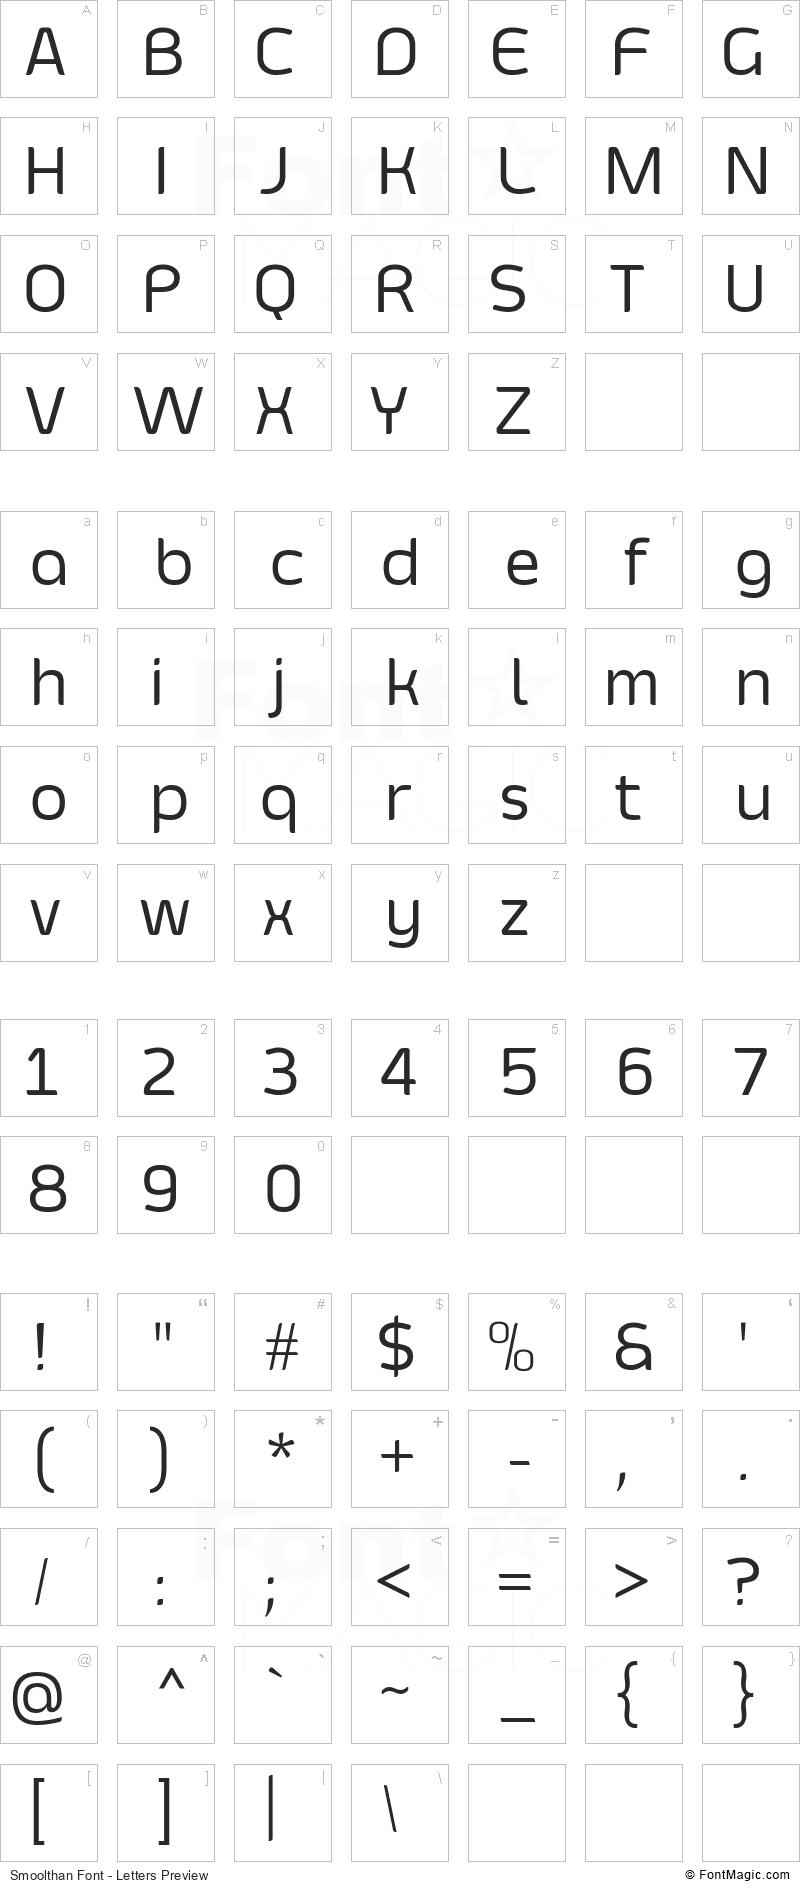 Smoolthan Font - All Latters Preview Chart